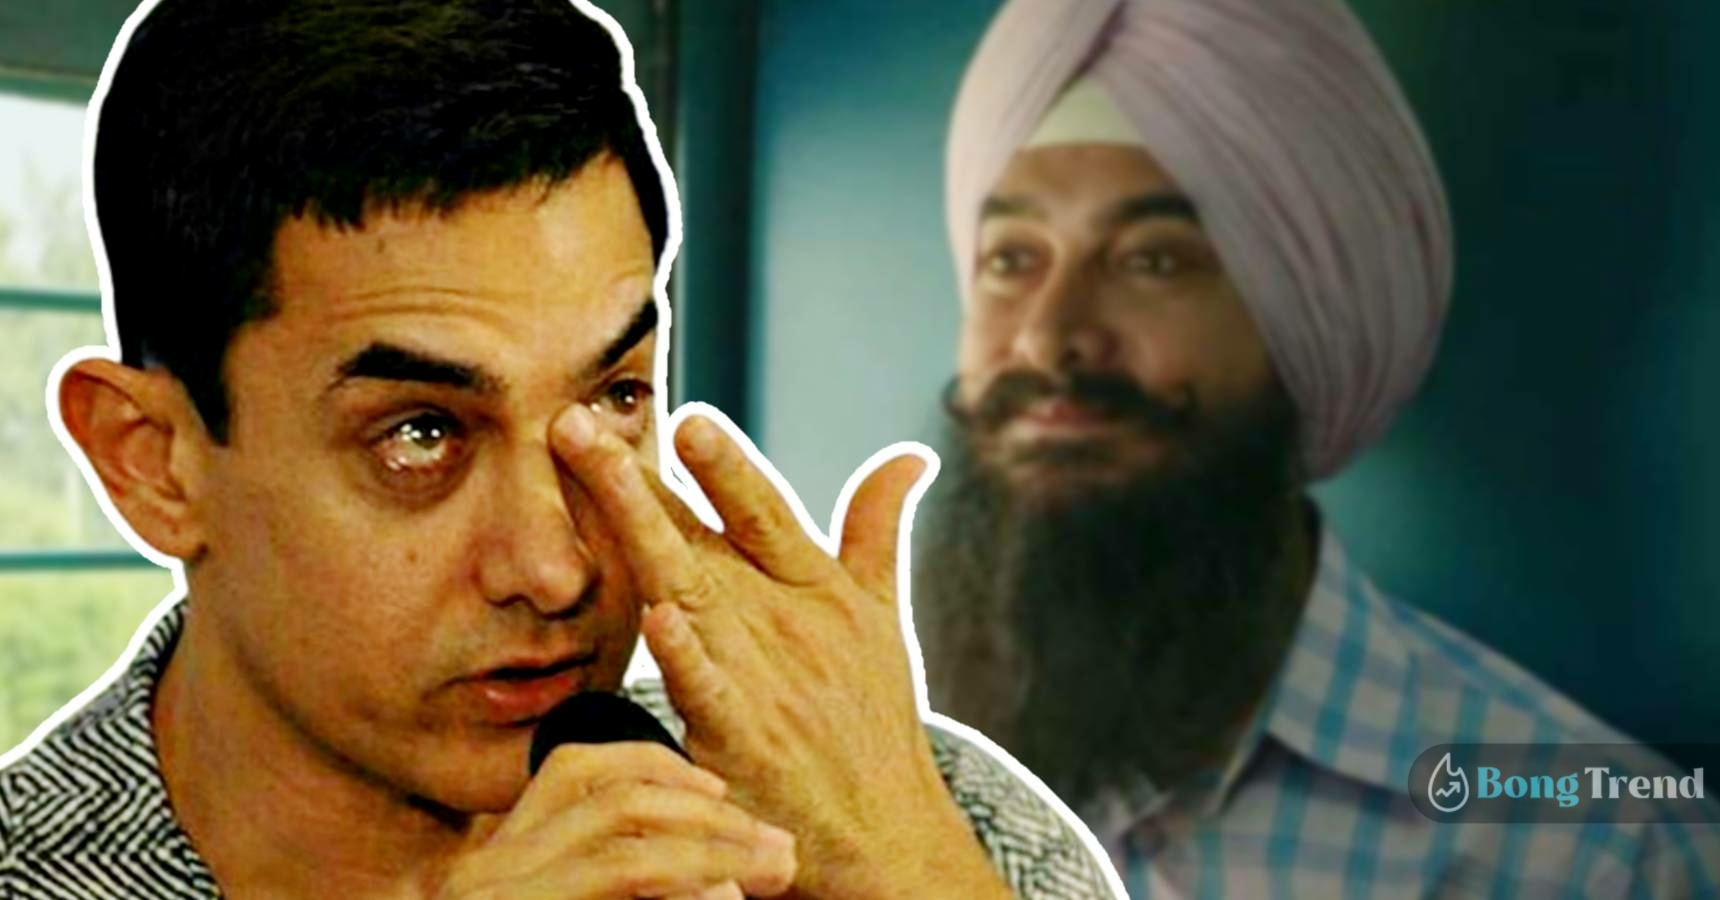 Bollywood superstar Aamir Khan takes a break from acting after Laal Singh Chaddha went flop